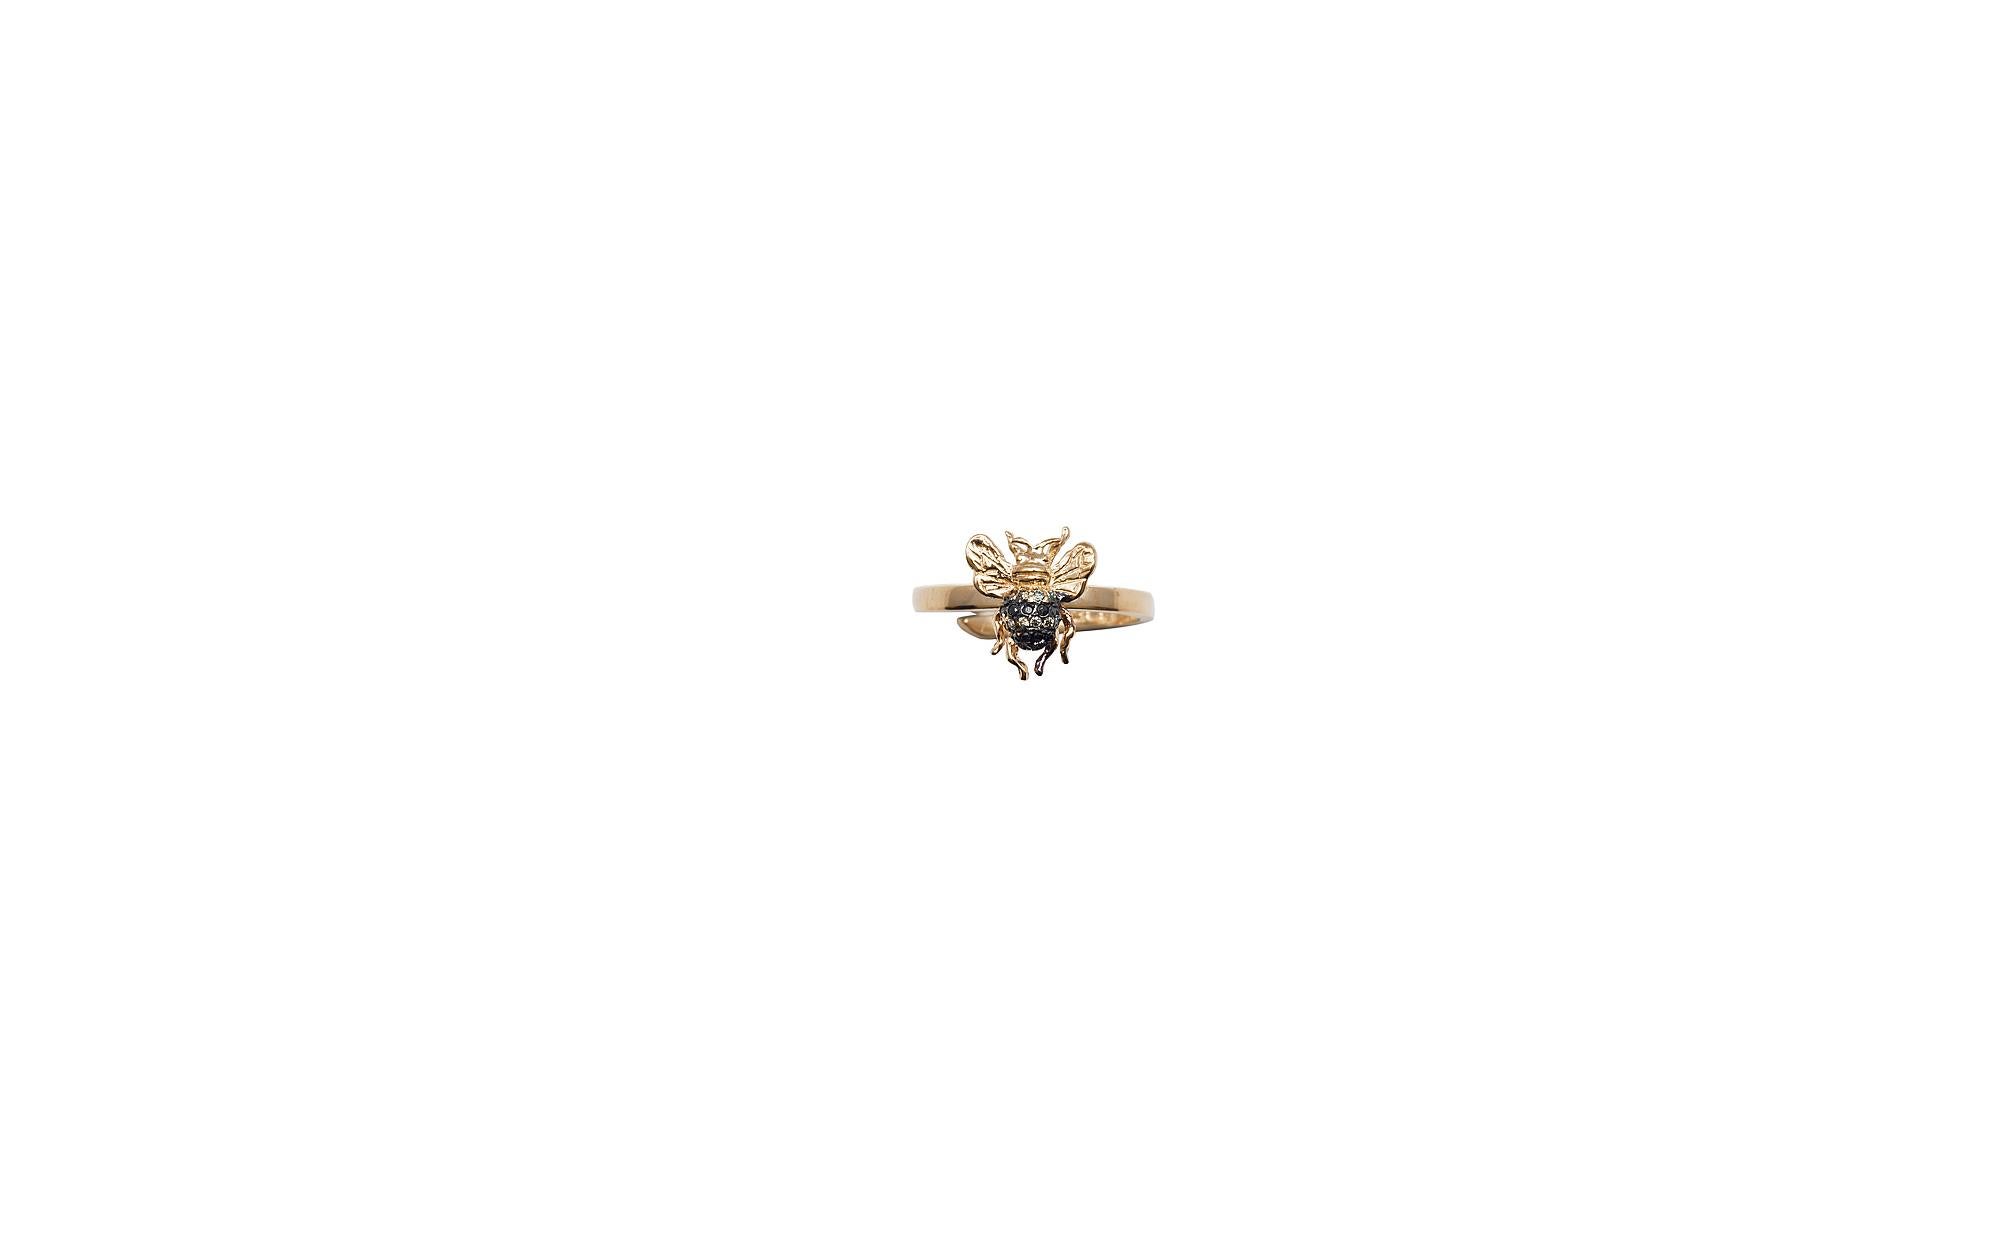 Mini bee gold band ring with pavé black and cognac diamonds.

Composition: 
Gold 3,20 gr (9K)
11 black diamonds 0,07 ct
10 cognac diamonds 0,07 ct

Size is adjustable from 6 US to 8 US ( italian size from 12 to 17)
Other sizes on demand, working